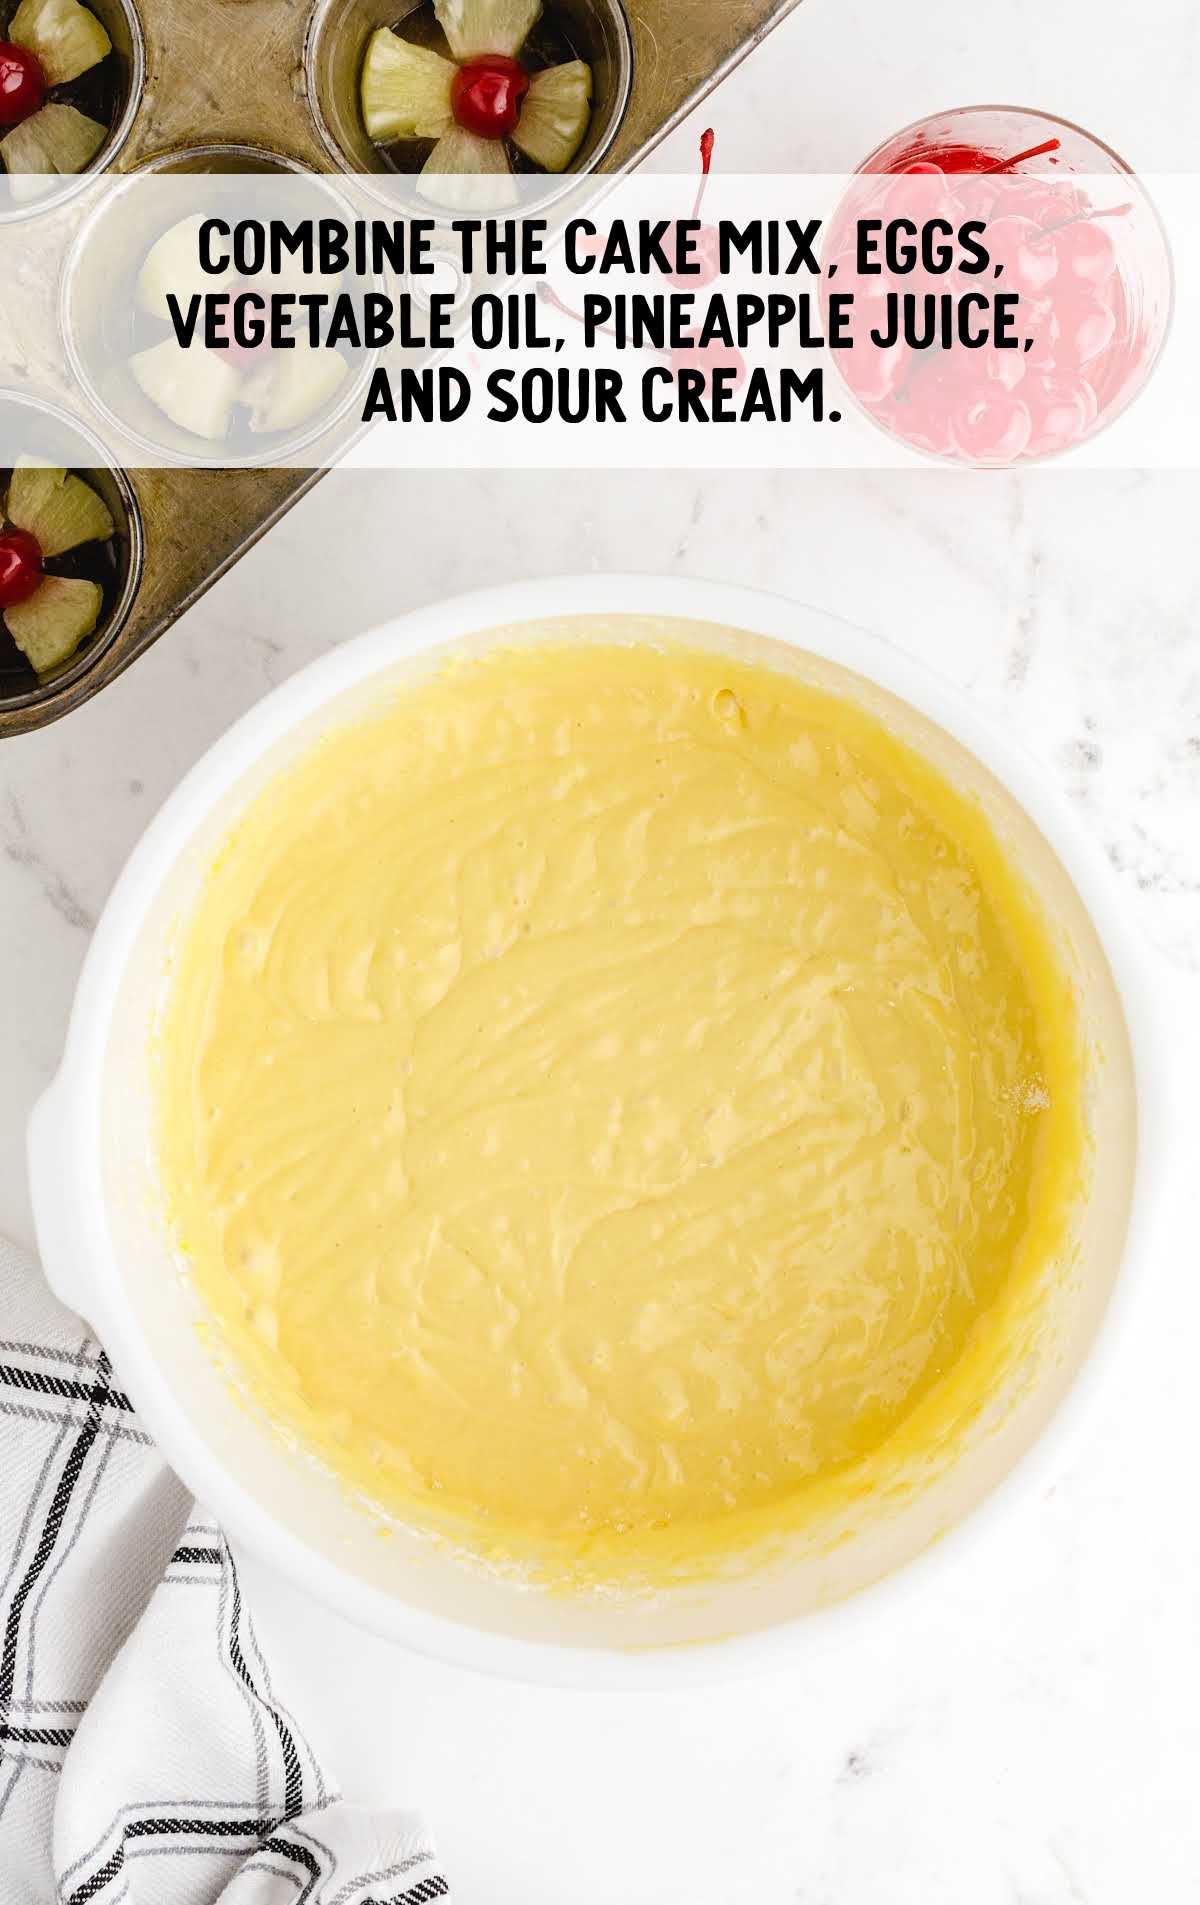 cake mix, eggs, vegetable oil, pineapple juice and sour cream combined 